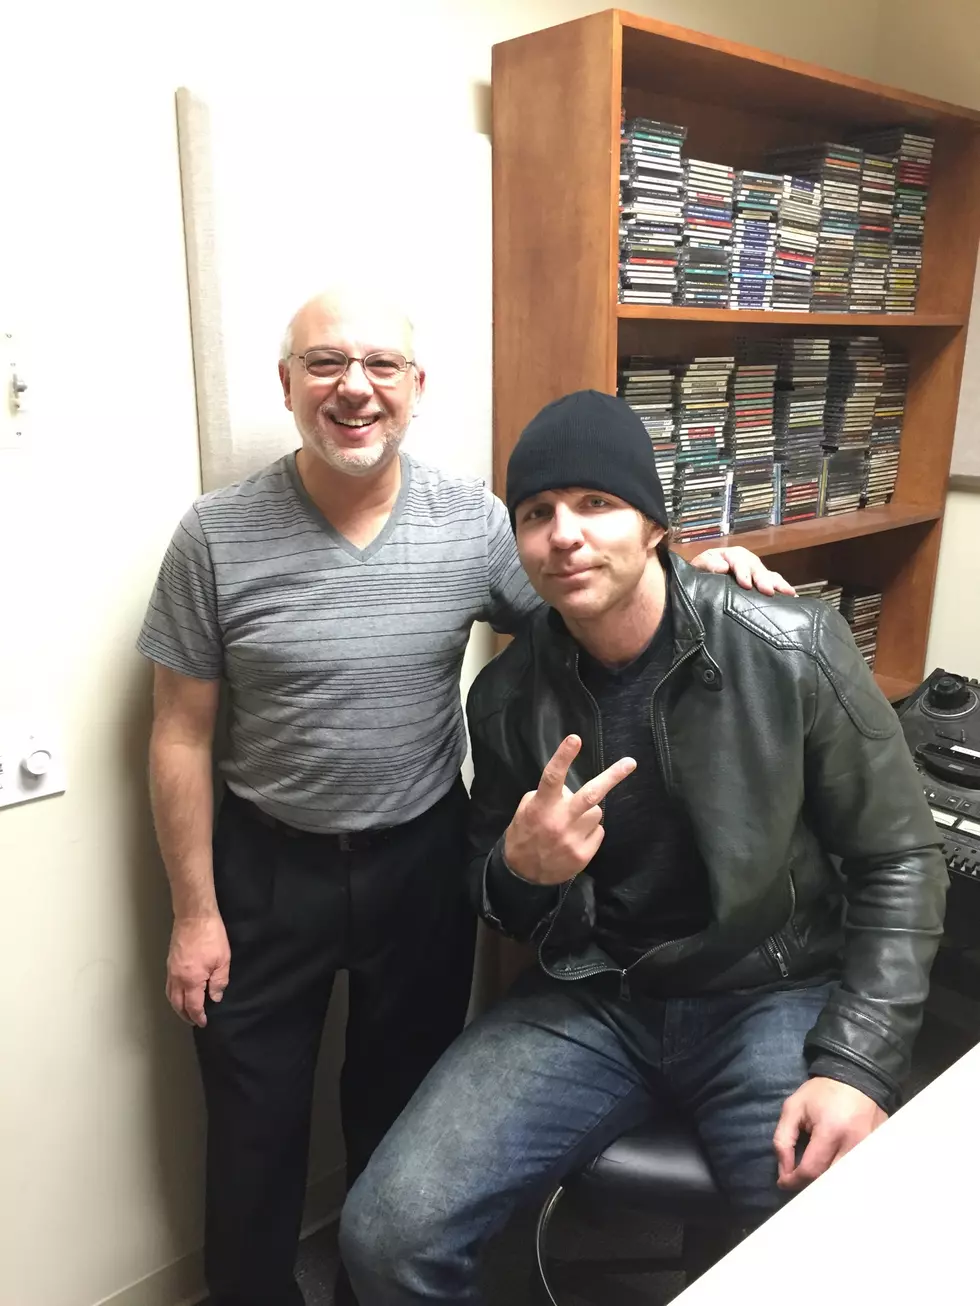 A Visit And Chat From The WWE’s Dean Ambrose [Audio]